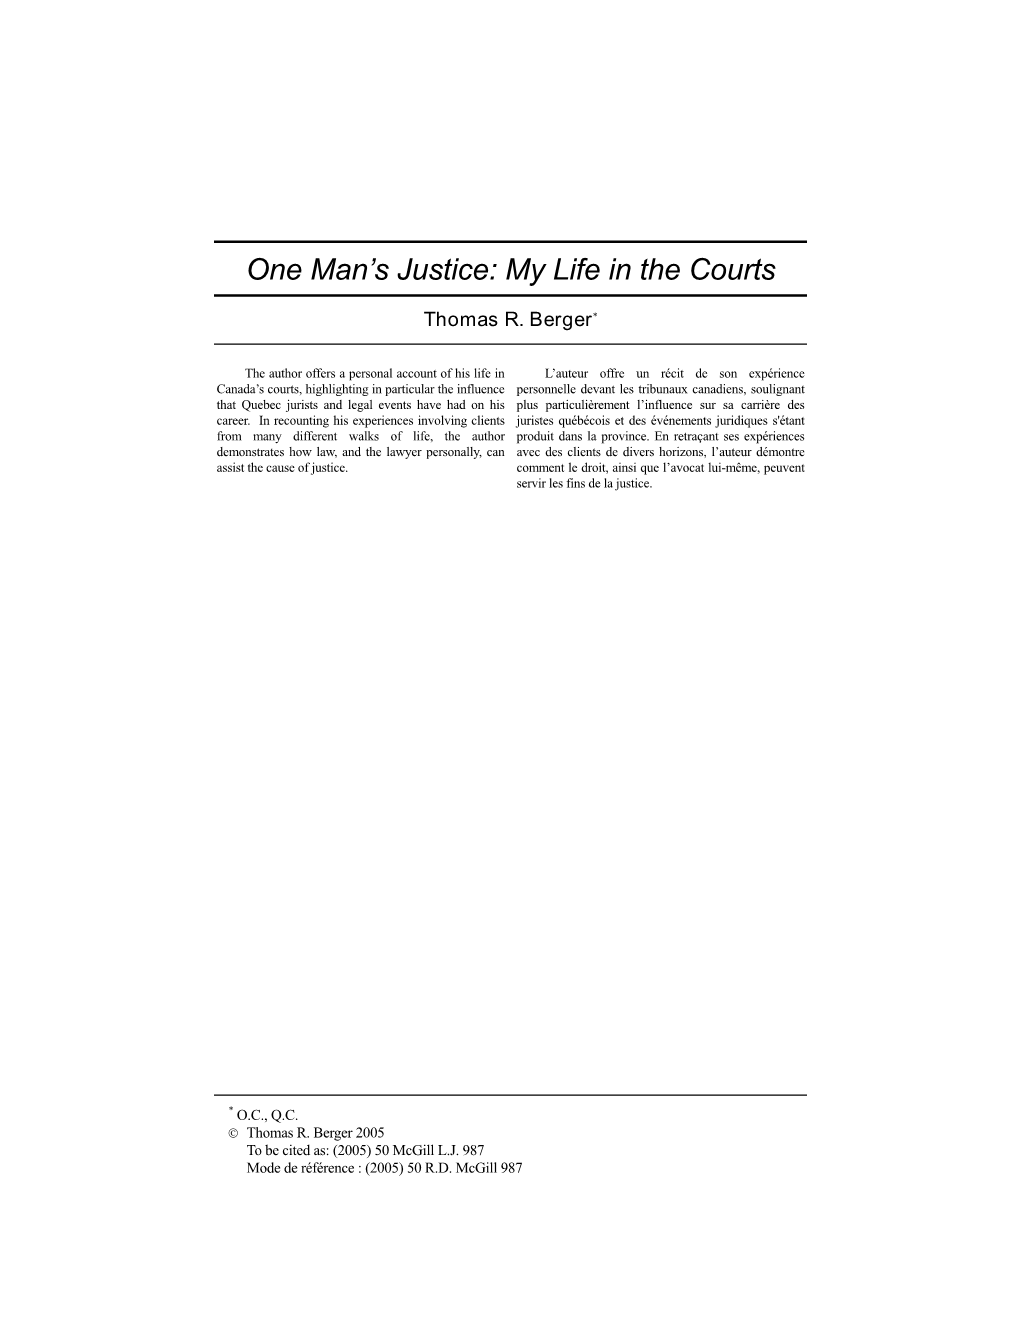 One Man's Justice: My Life in the Courts